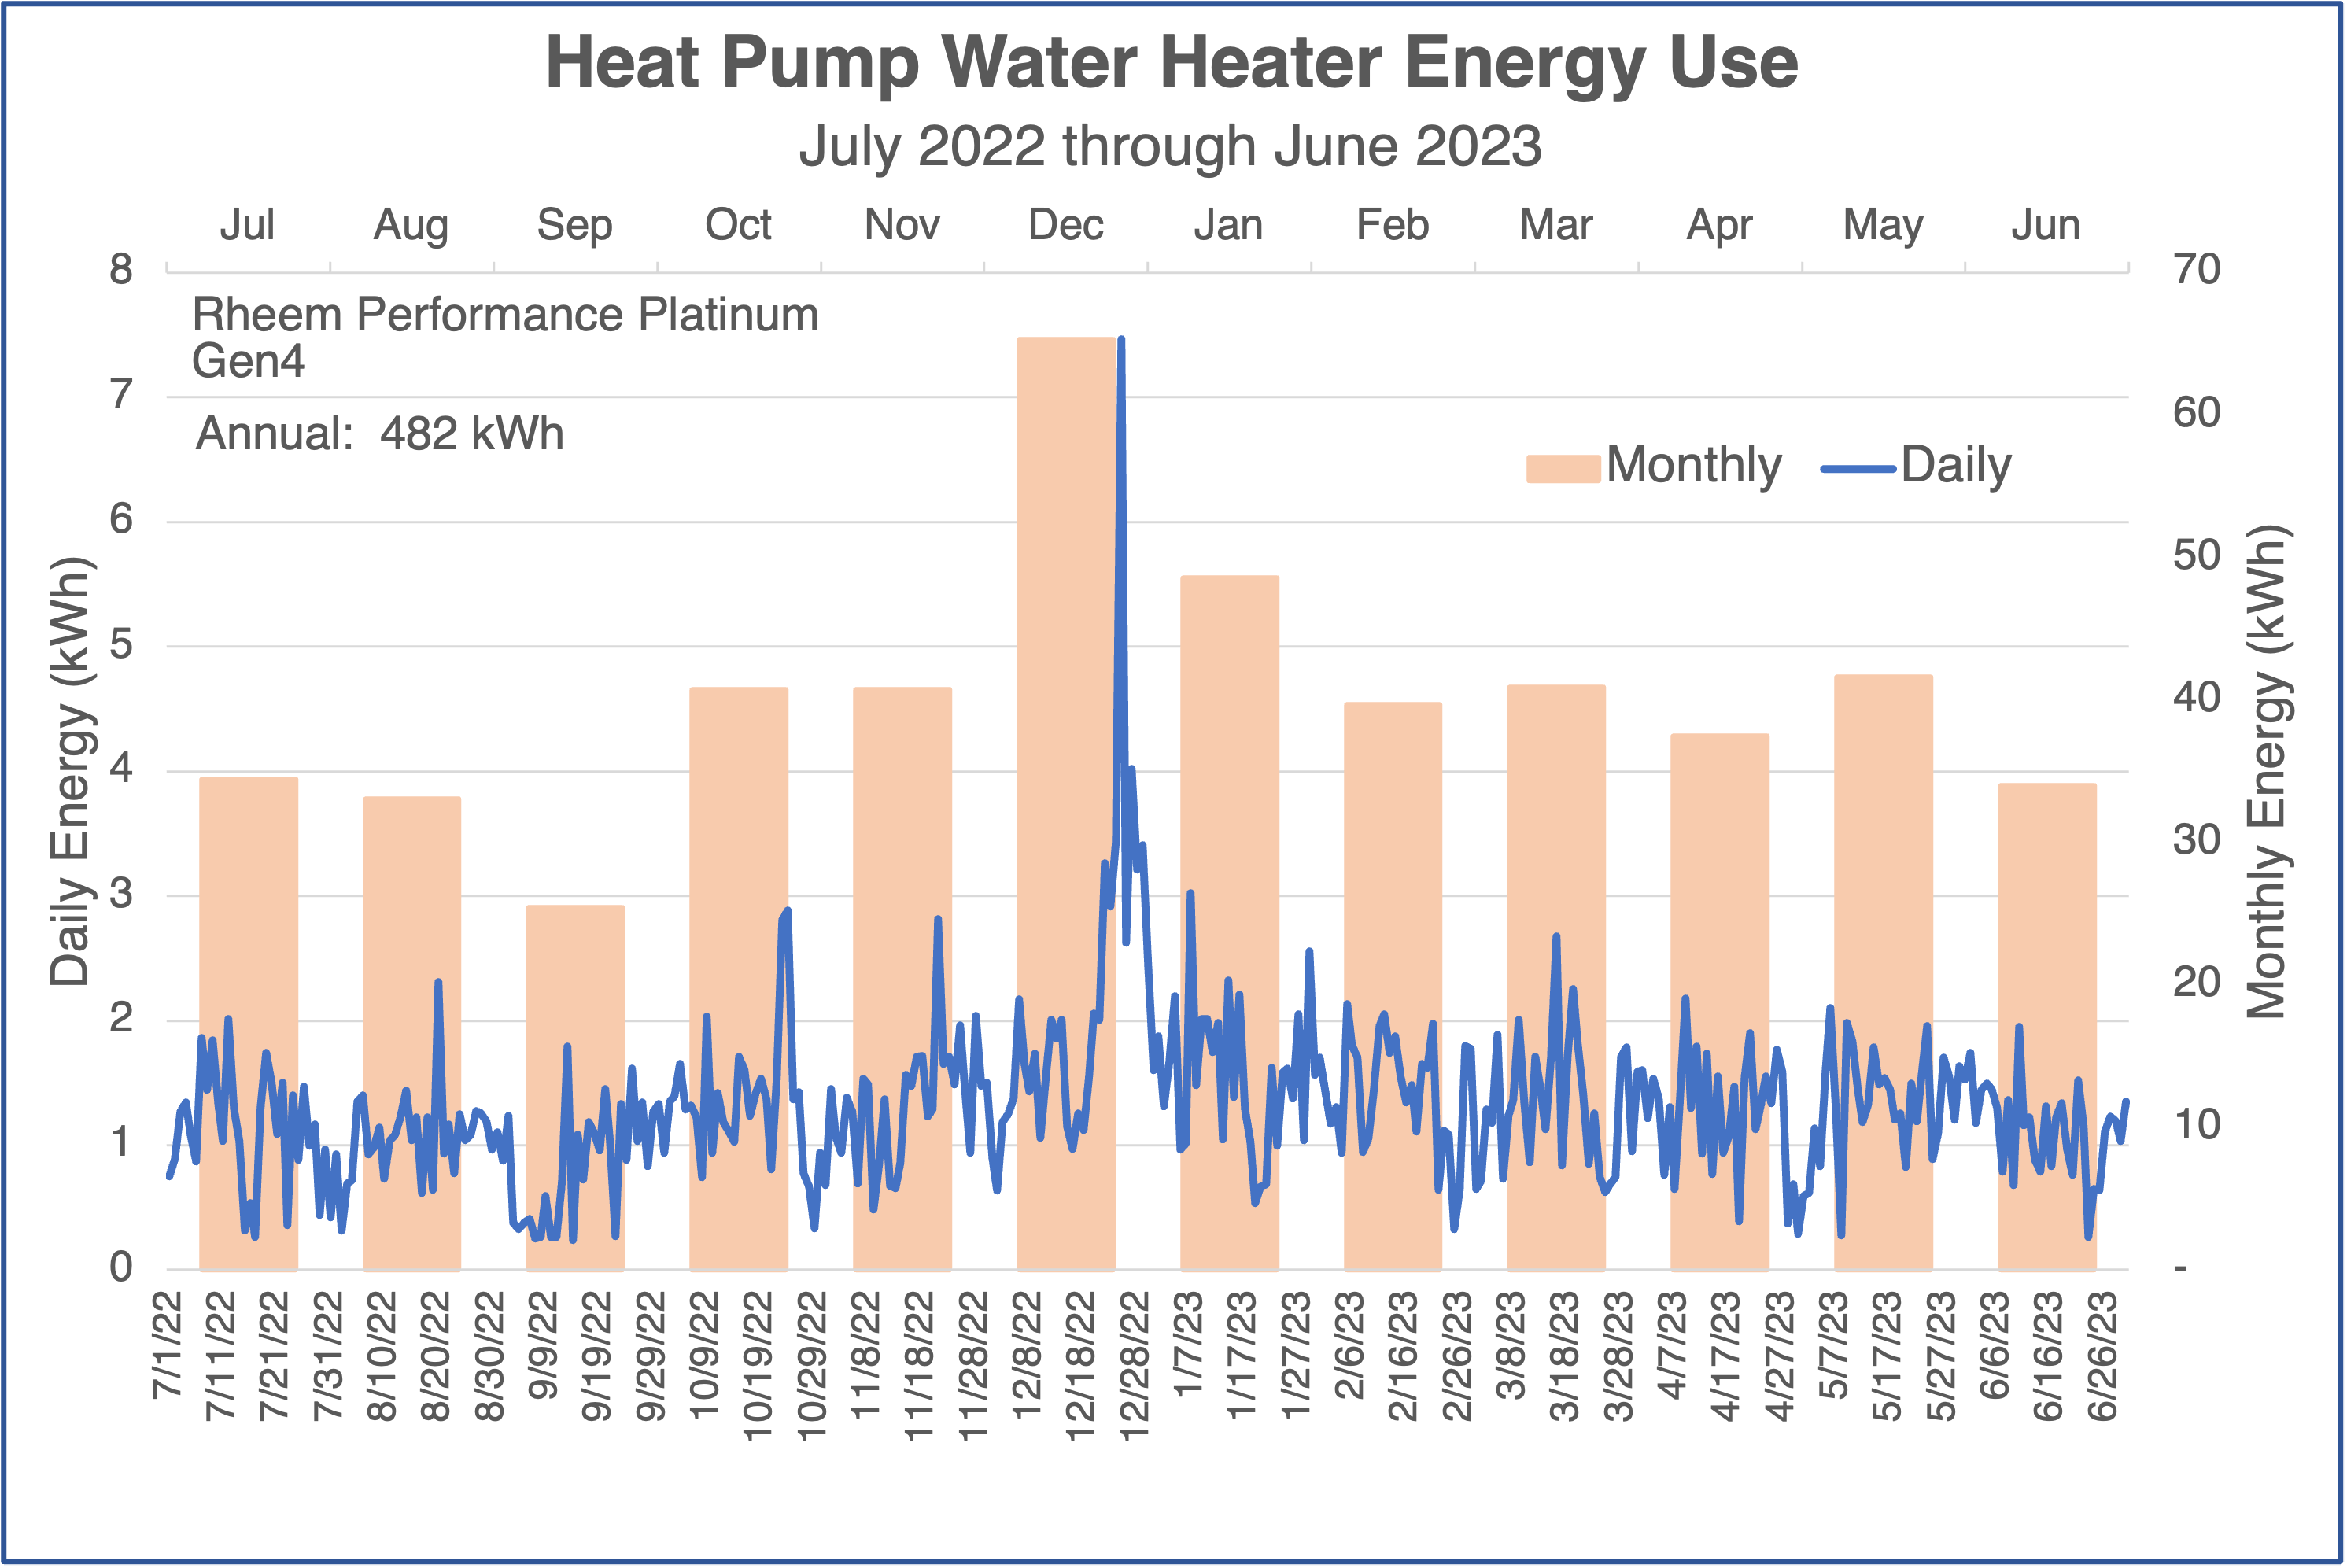 Heat pump water heater energy use, daily and monthly